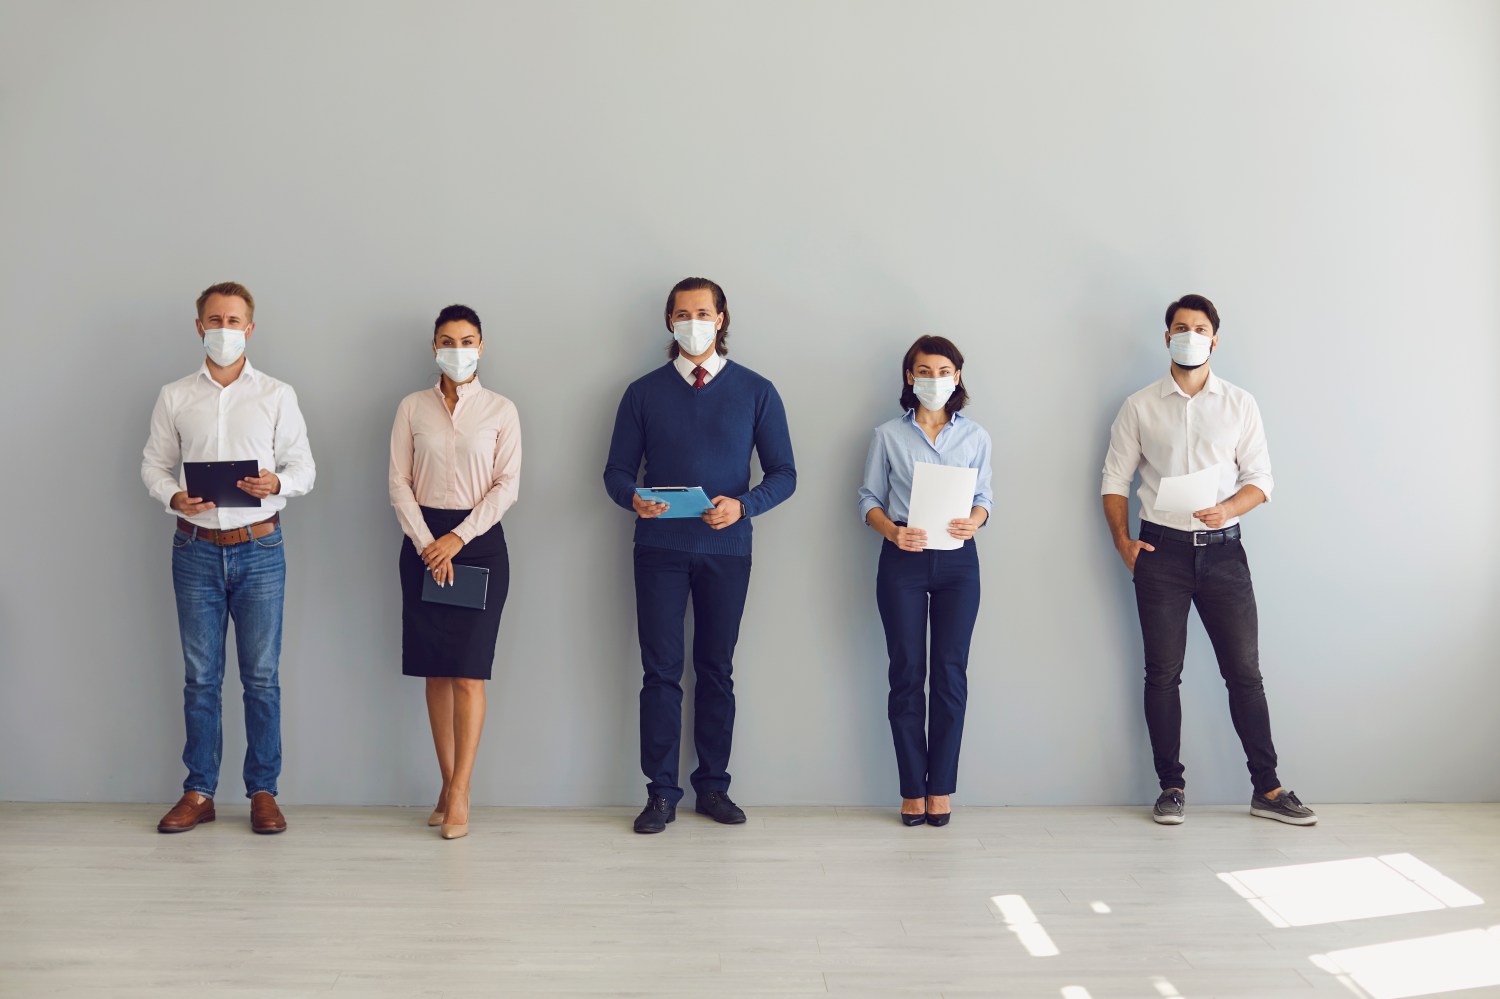 Stock Photo of Job Seekers with Masks